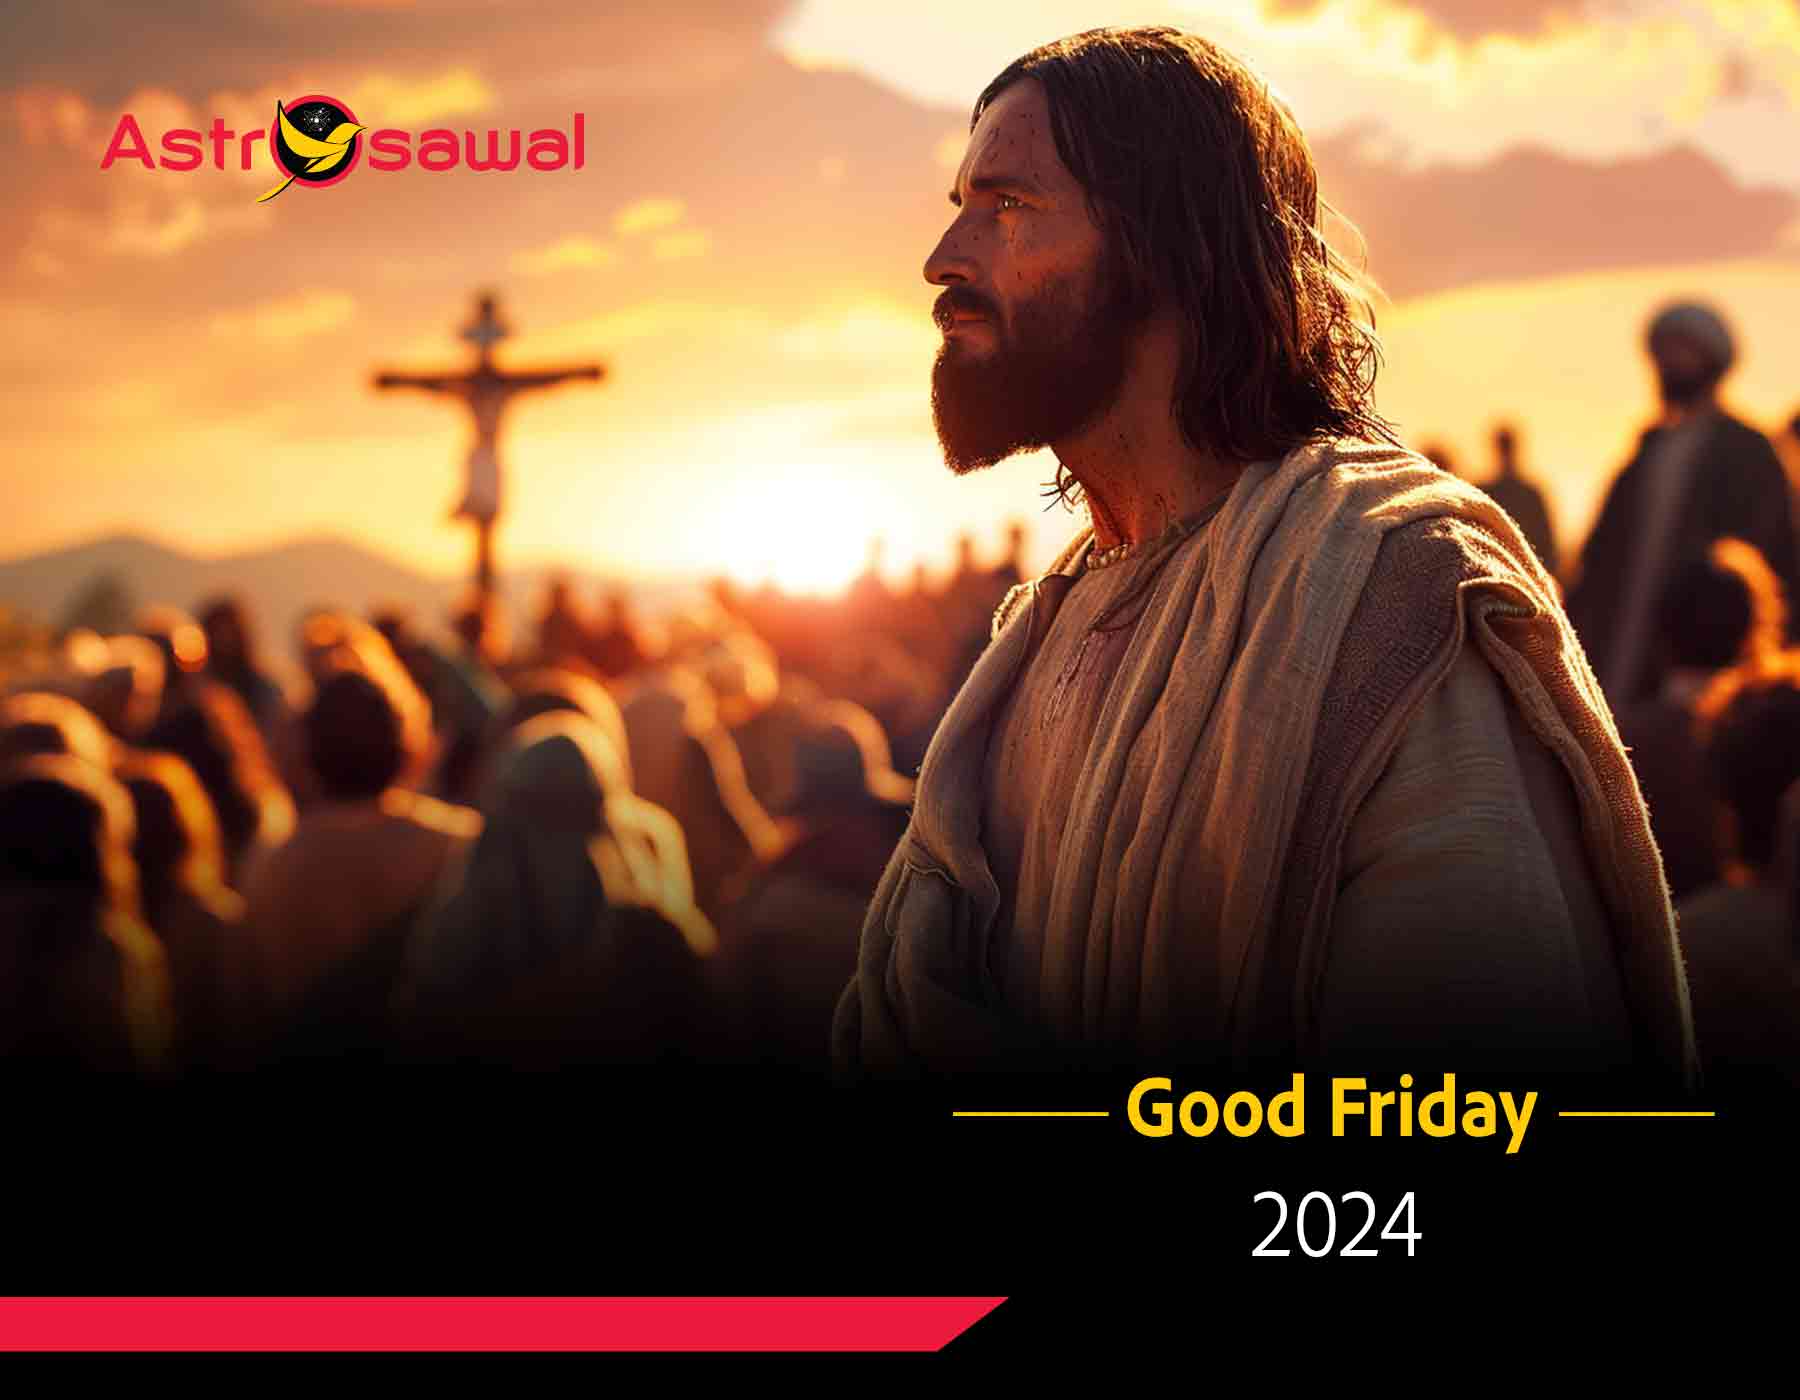 Good Friday 2024: All about the sacred friday